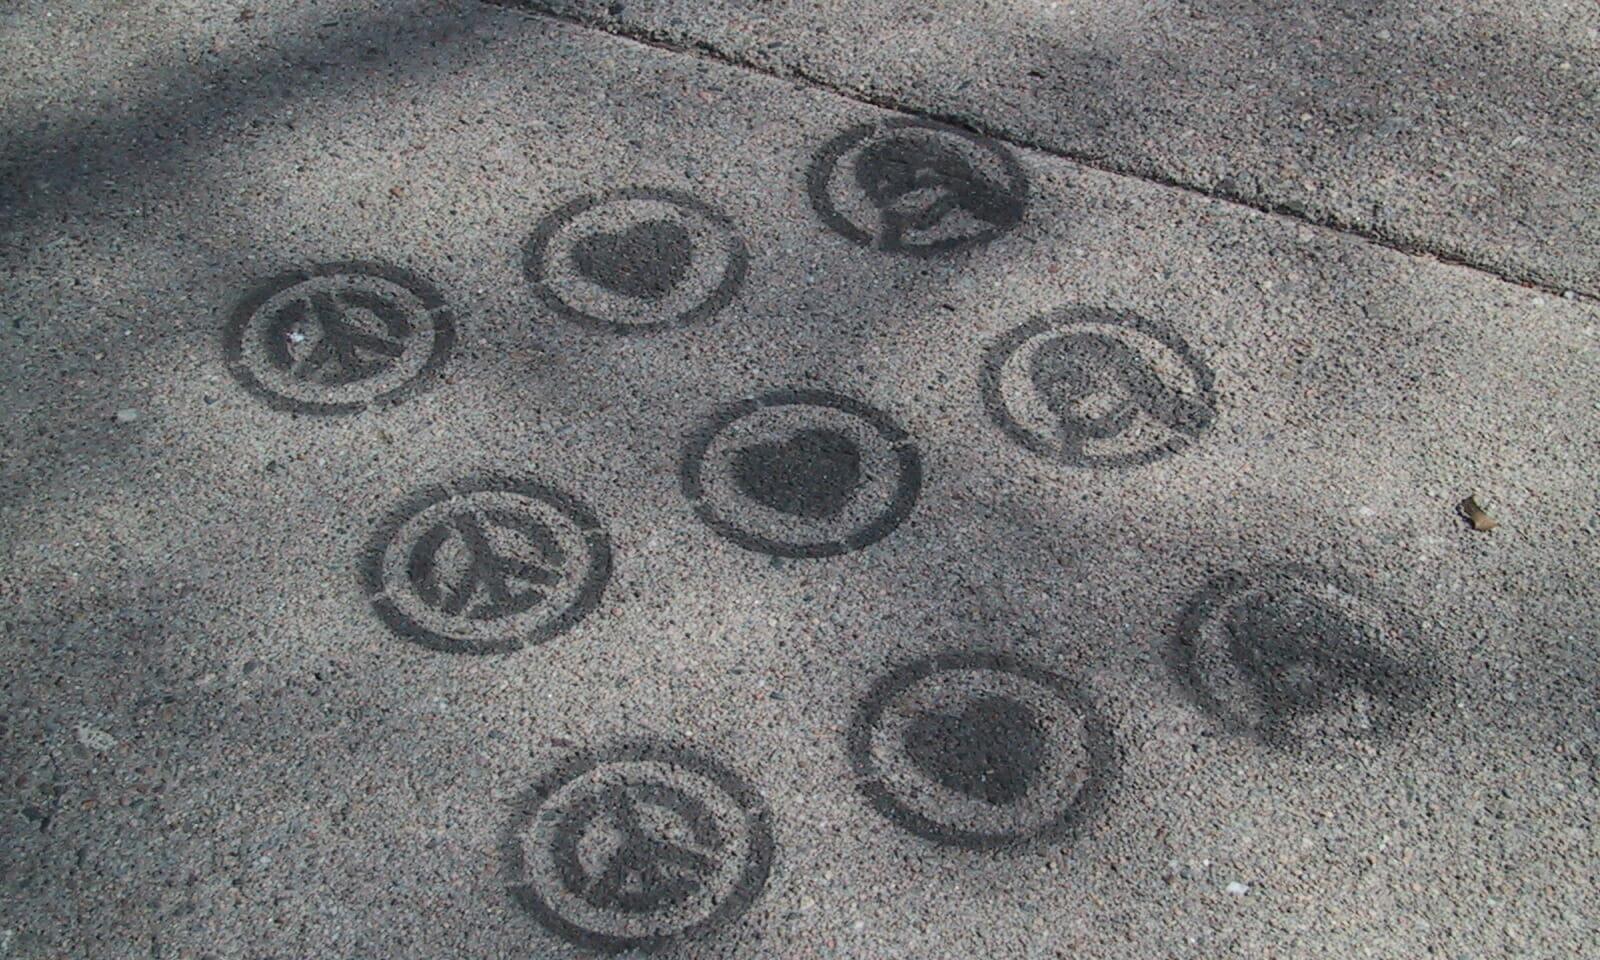 A sidewalk depiction of IBM&#8217;s Peace, Love, and Linux advertising campaign in 2001. (&#8220;Peace, Love, and Linux&#8221; by kino-eye is licensed under CC BY-NC-SA 2.0)